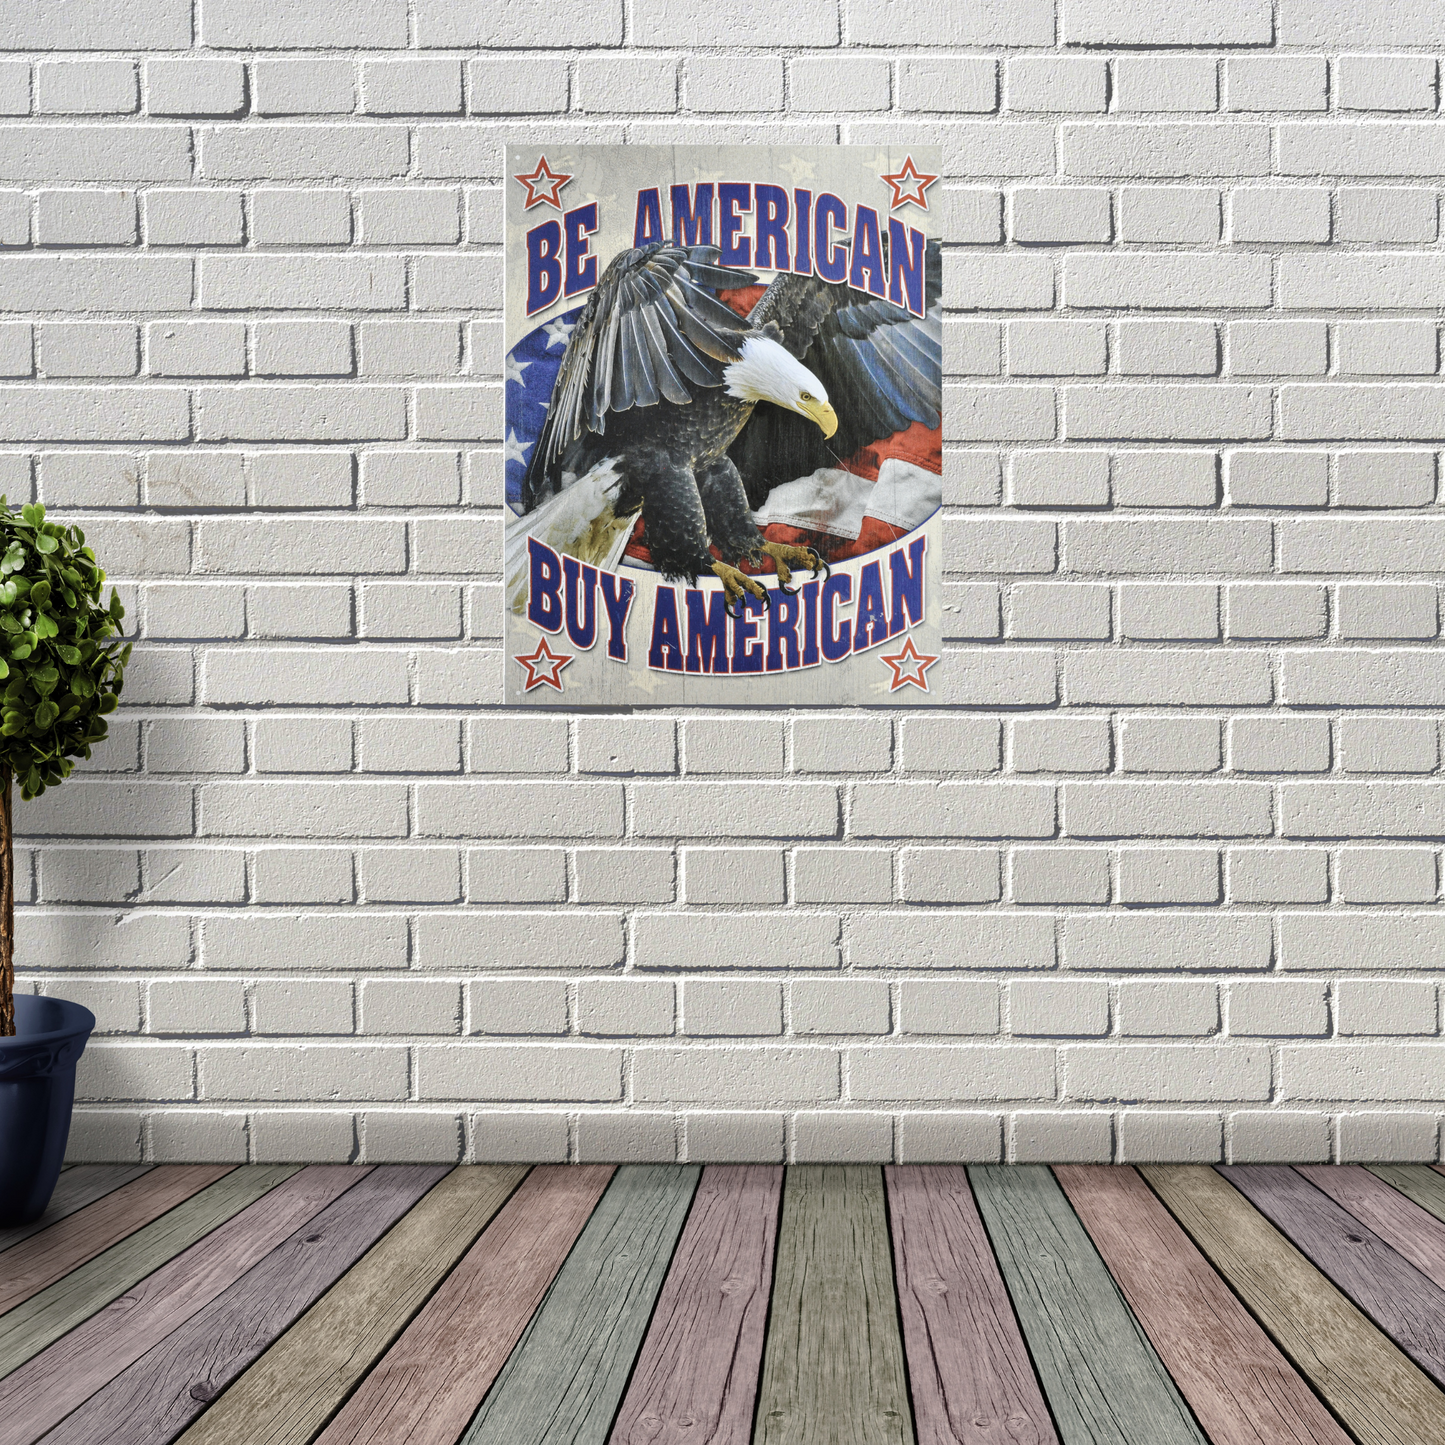 Vintage Poster Print that says " Be American, Buy American" with a bald eagle flying in the middle. With Red white and blue American flag in the background. On wall for scale.